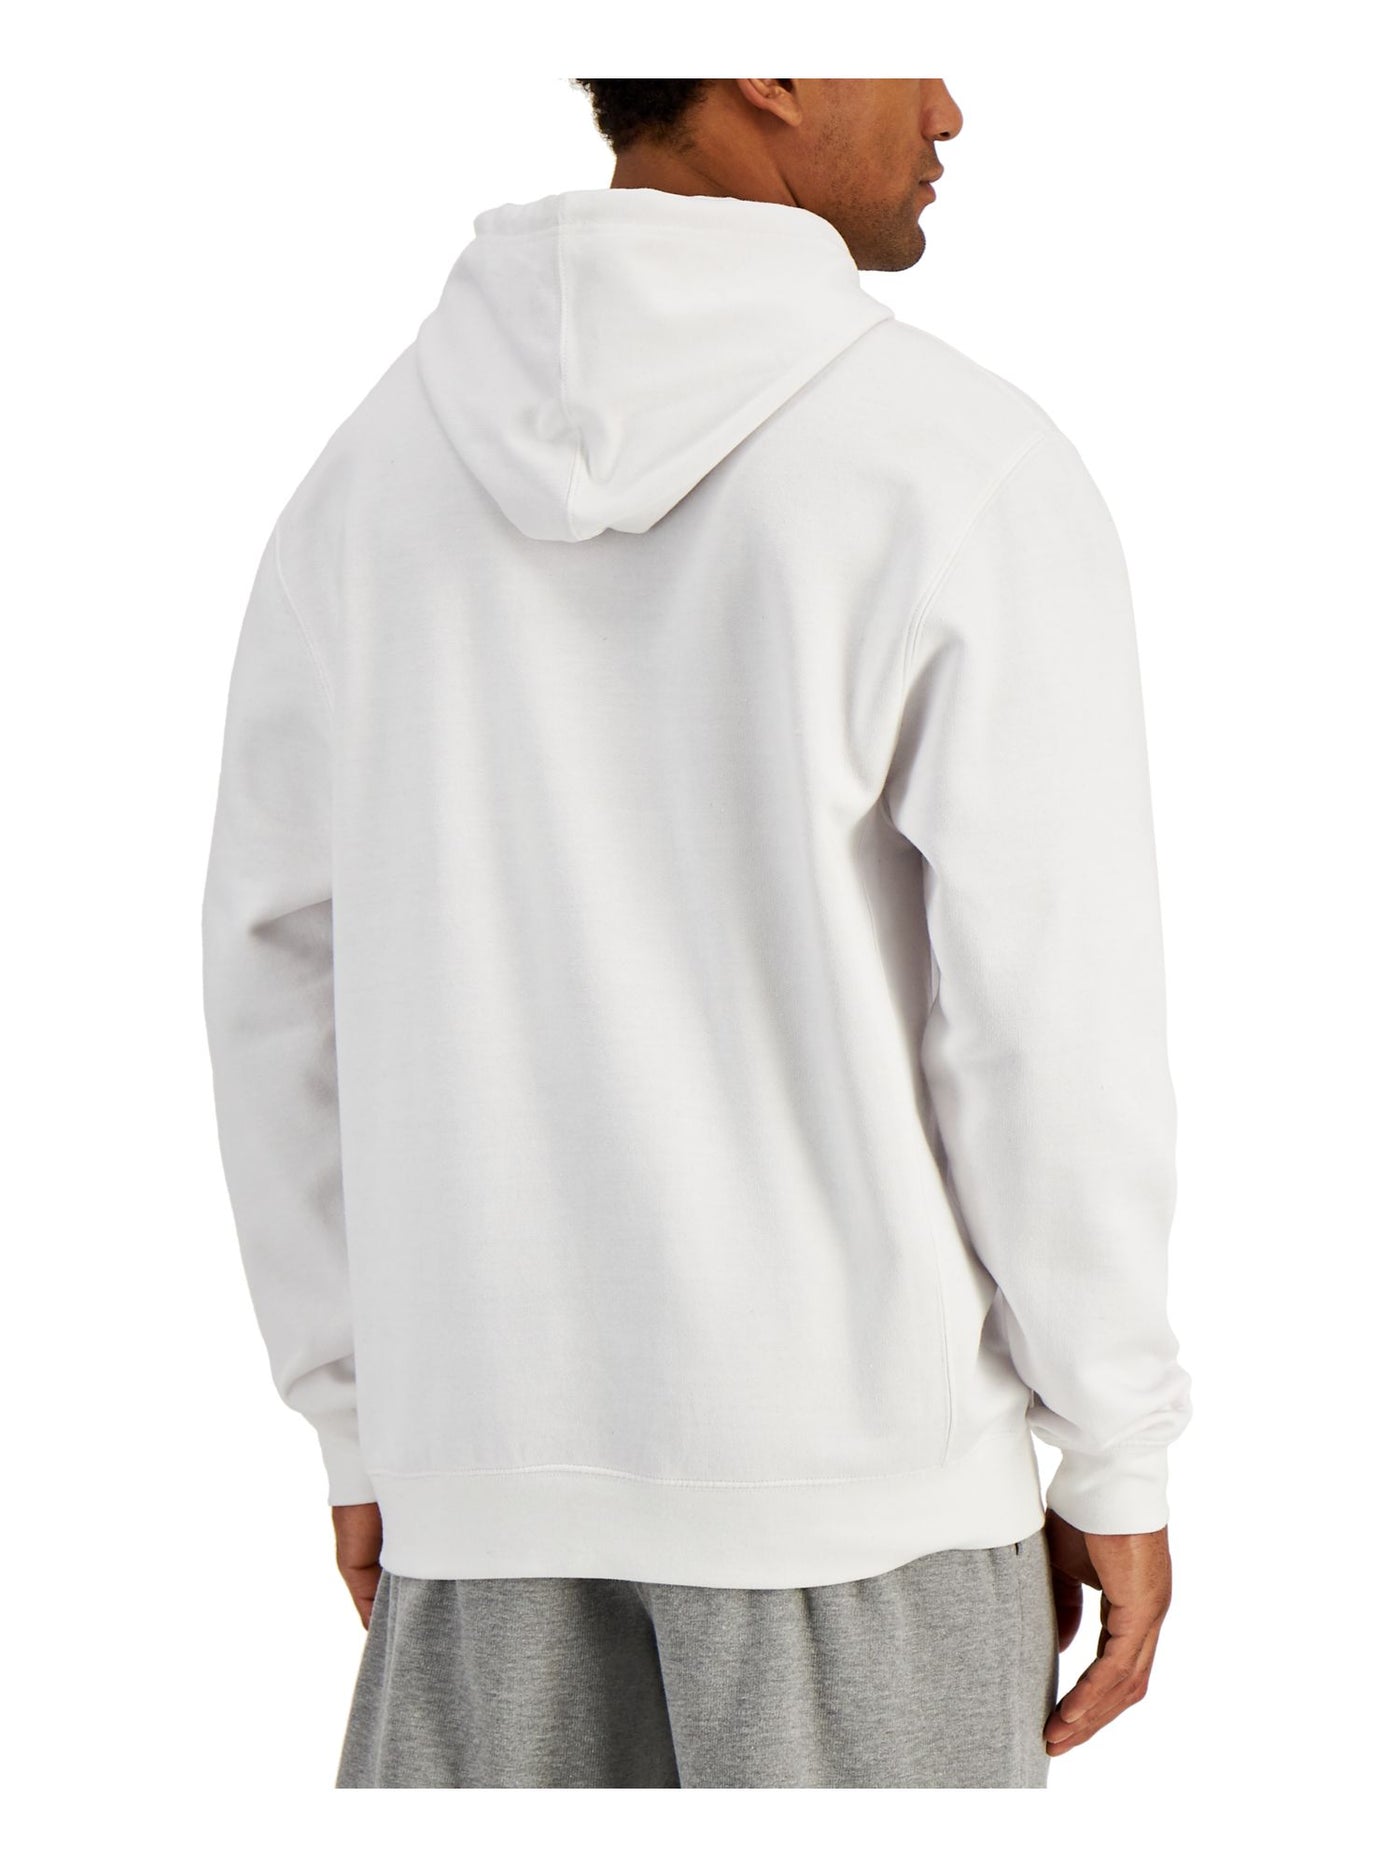 RUSSELL ATHLETIC Mens Santiago White Graphic Draw String Hoodie M